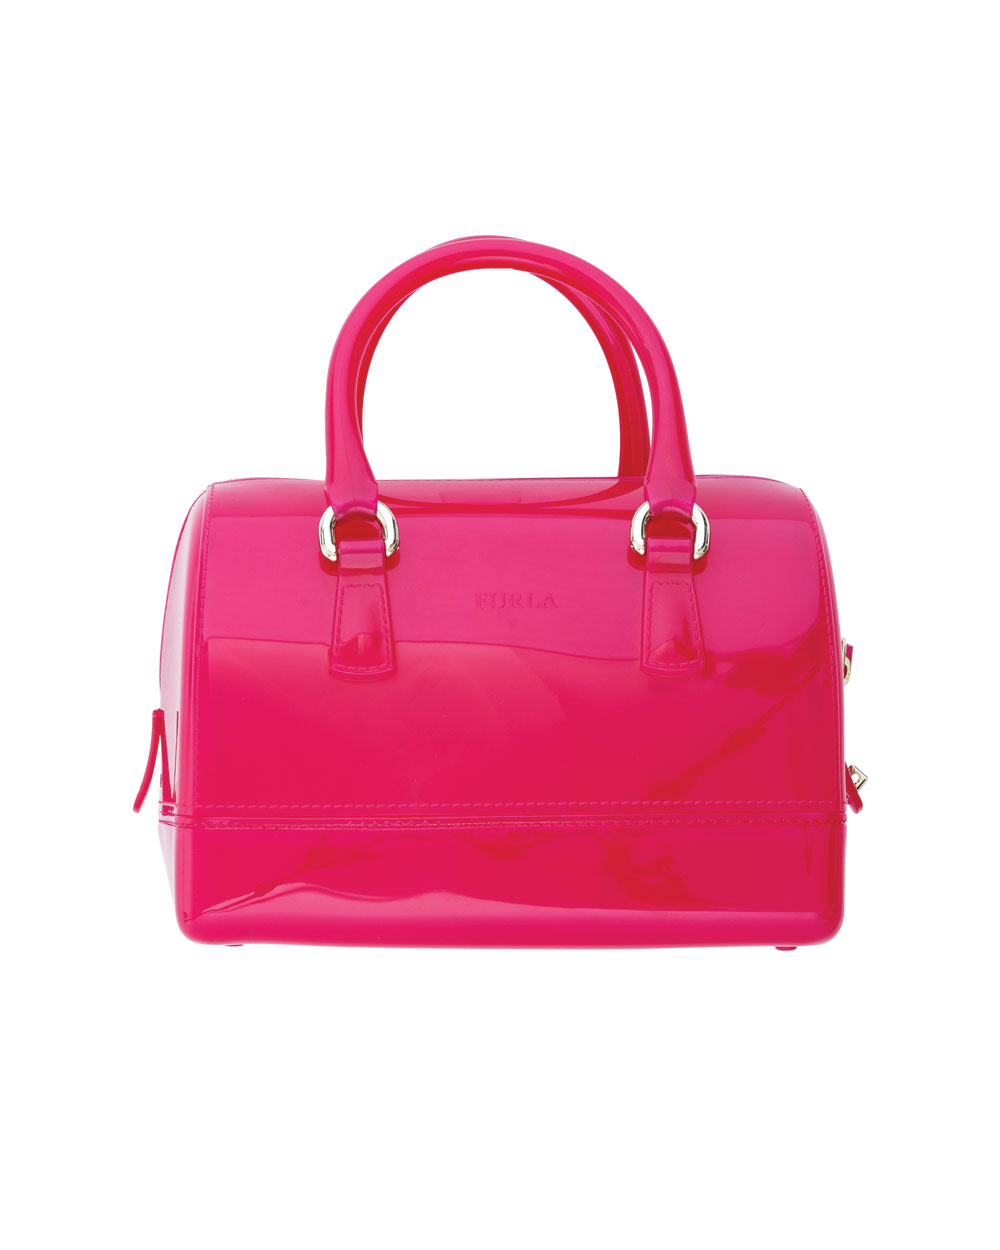 Furla bag, $350, from T Galleria by DFS